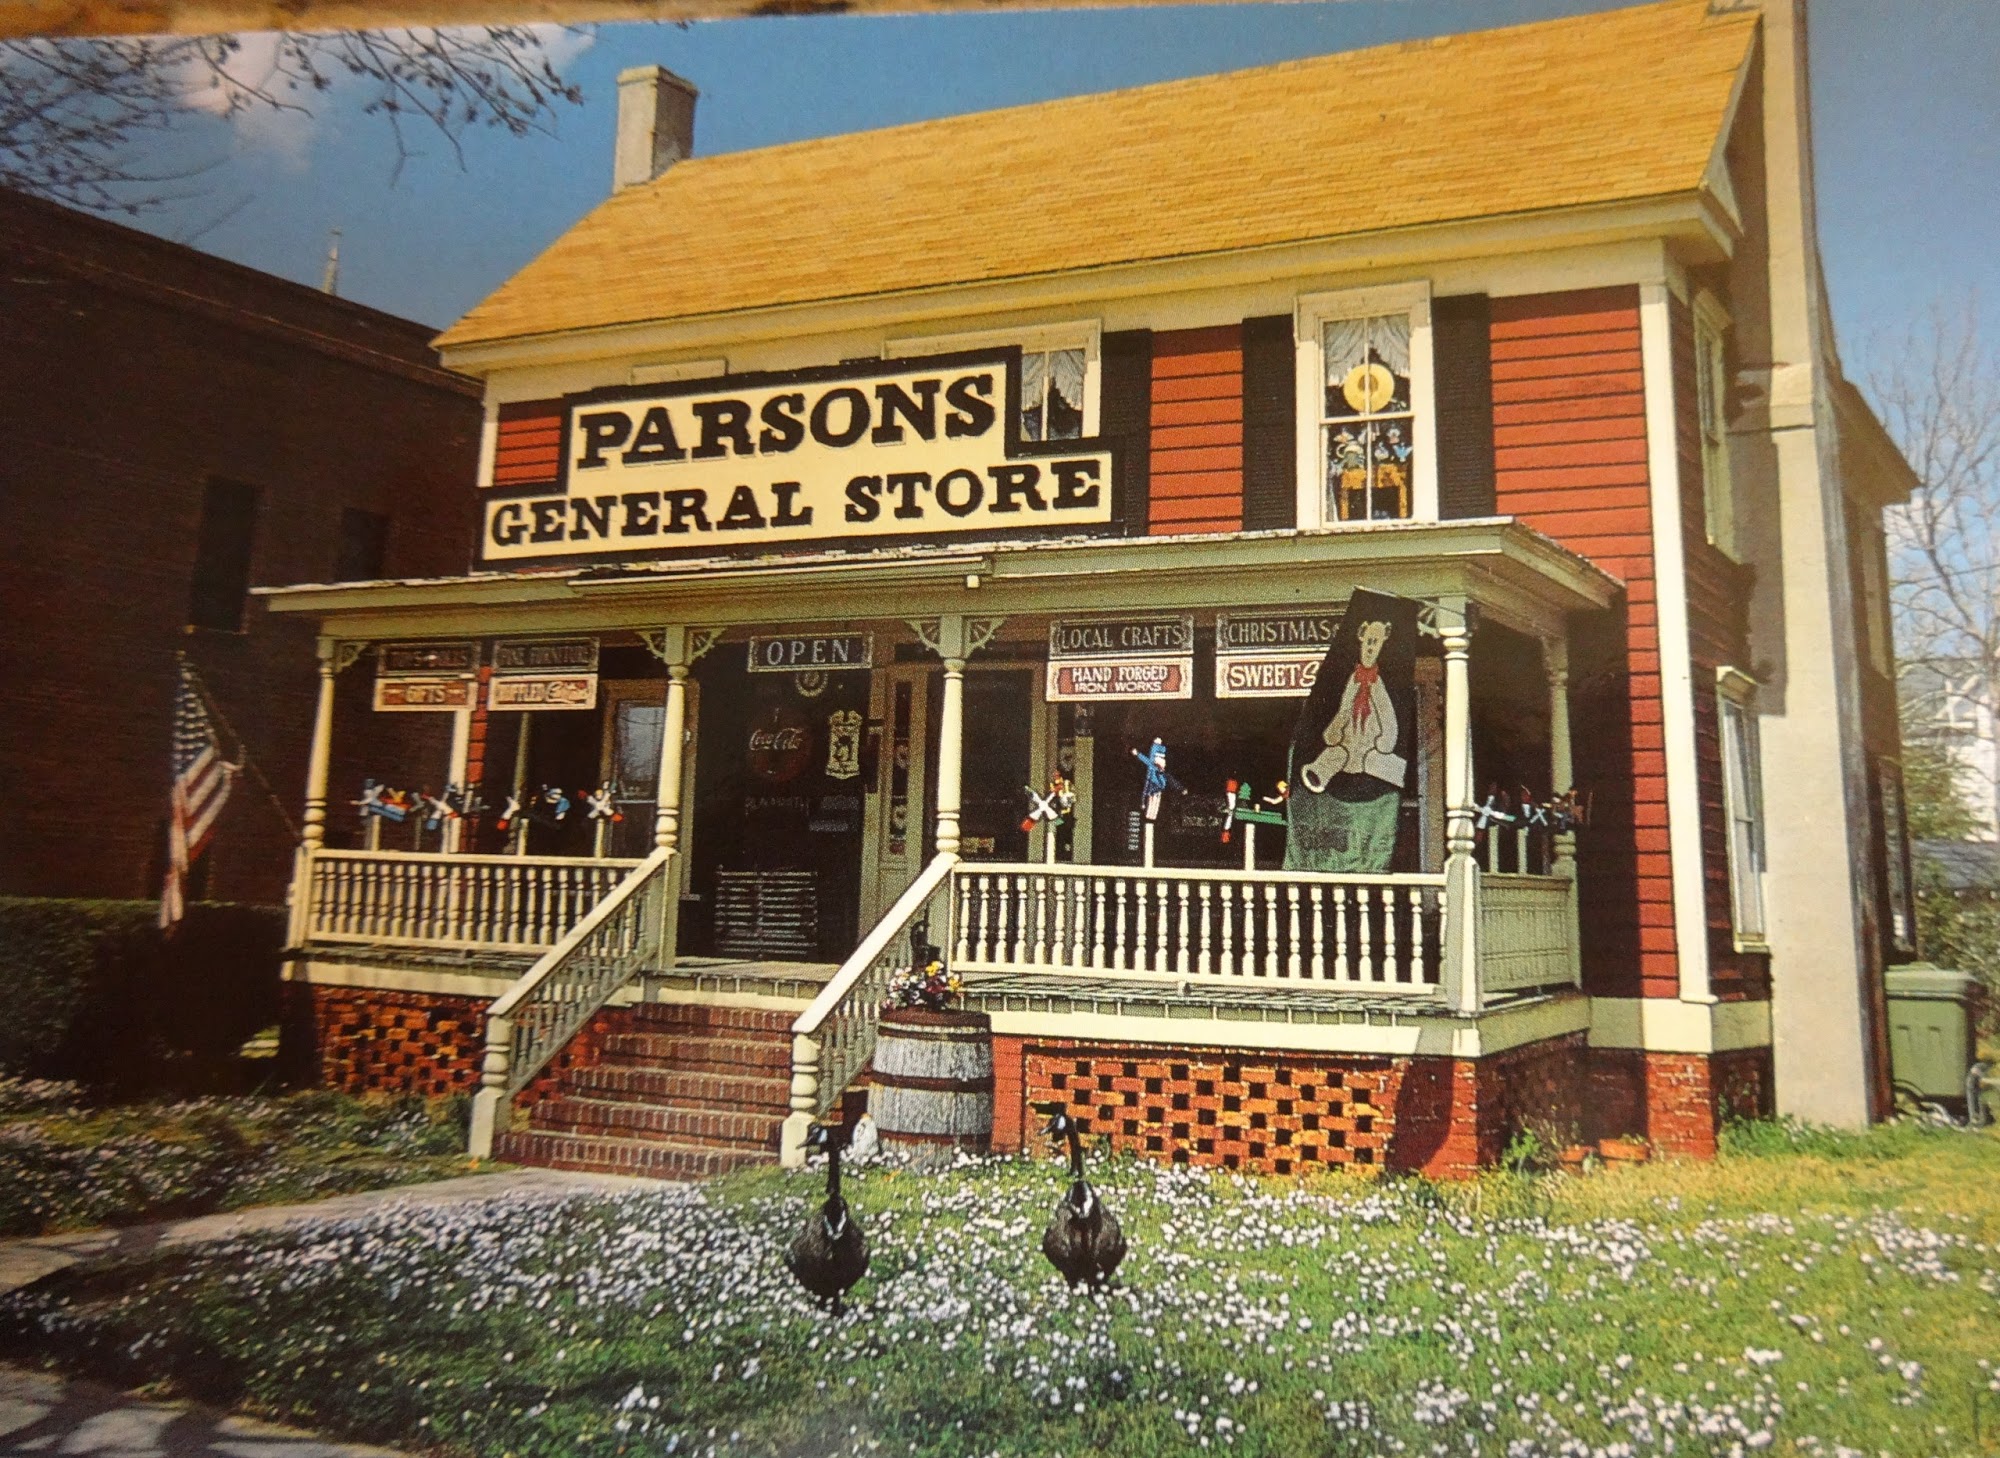 Parson's General Store